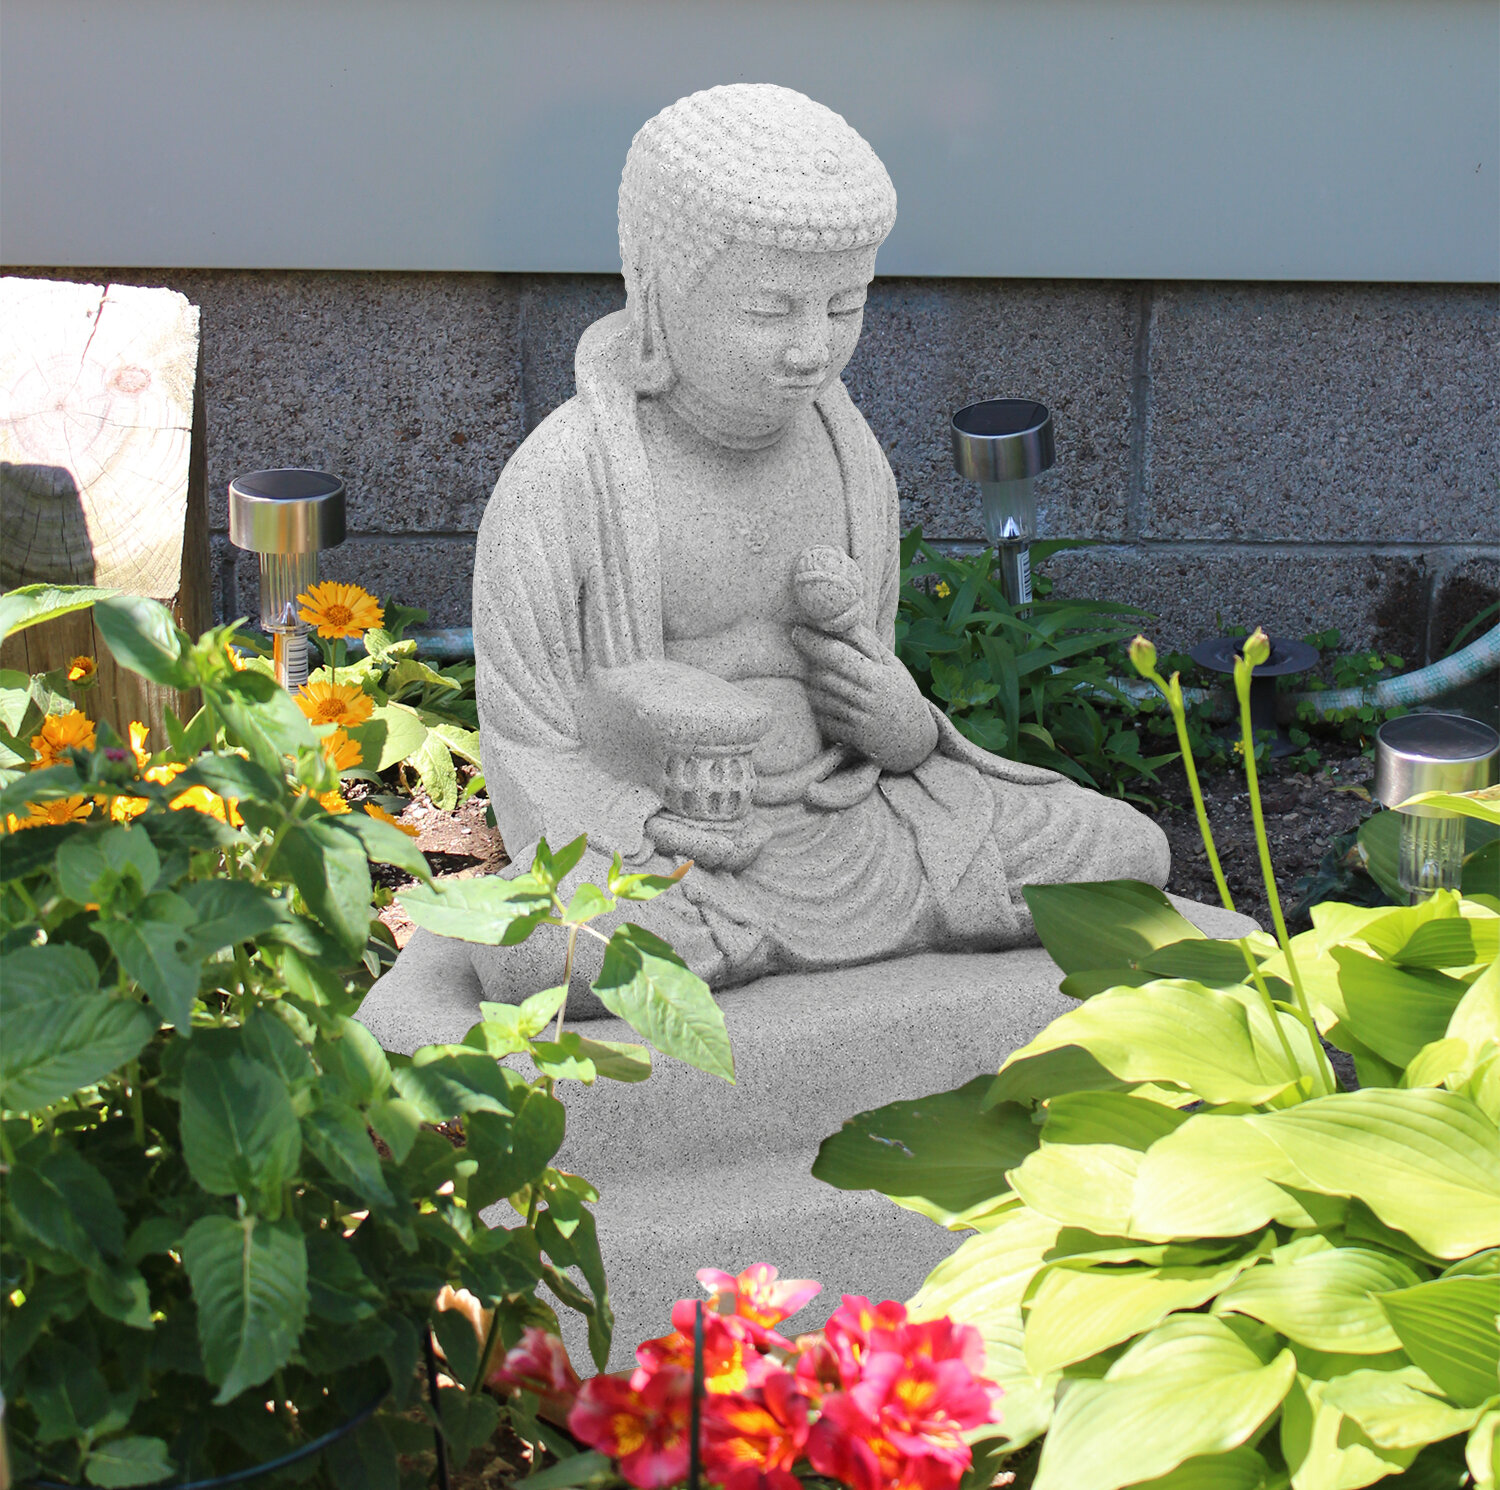 Beautifully Detailed Meditation Buddhas Statue For The Home Or Garden From Sius 